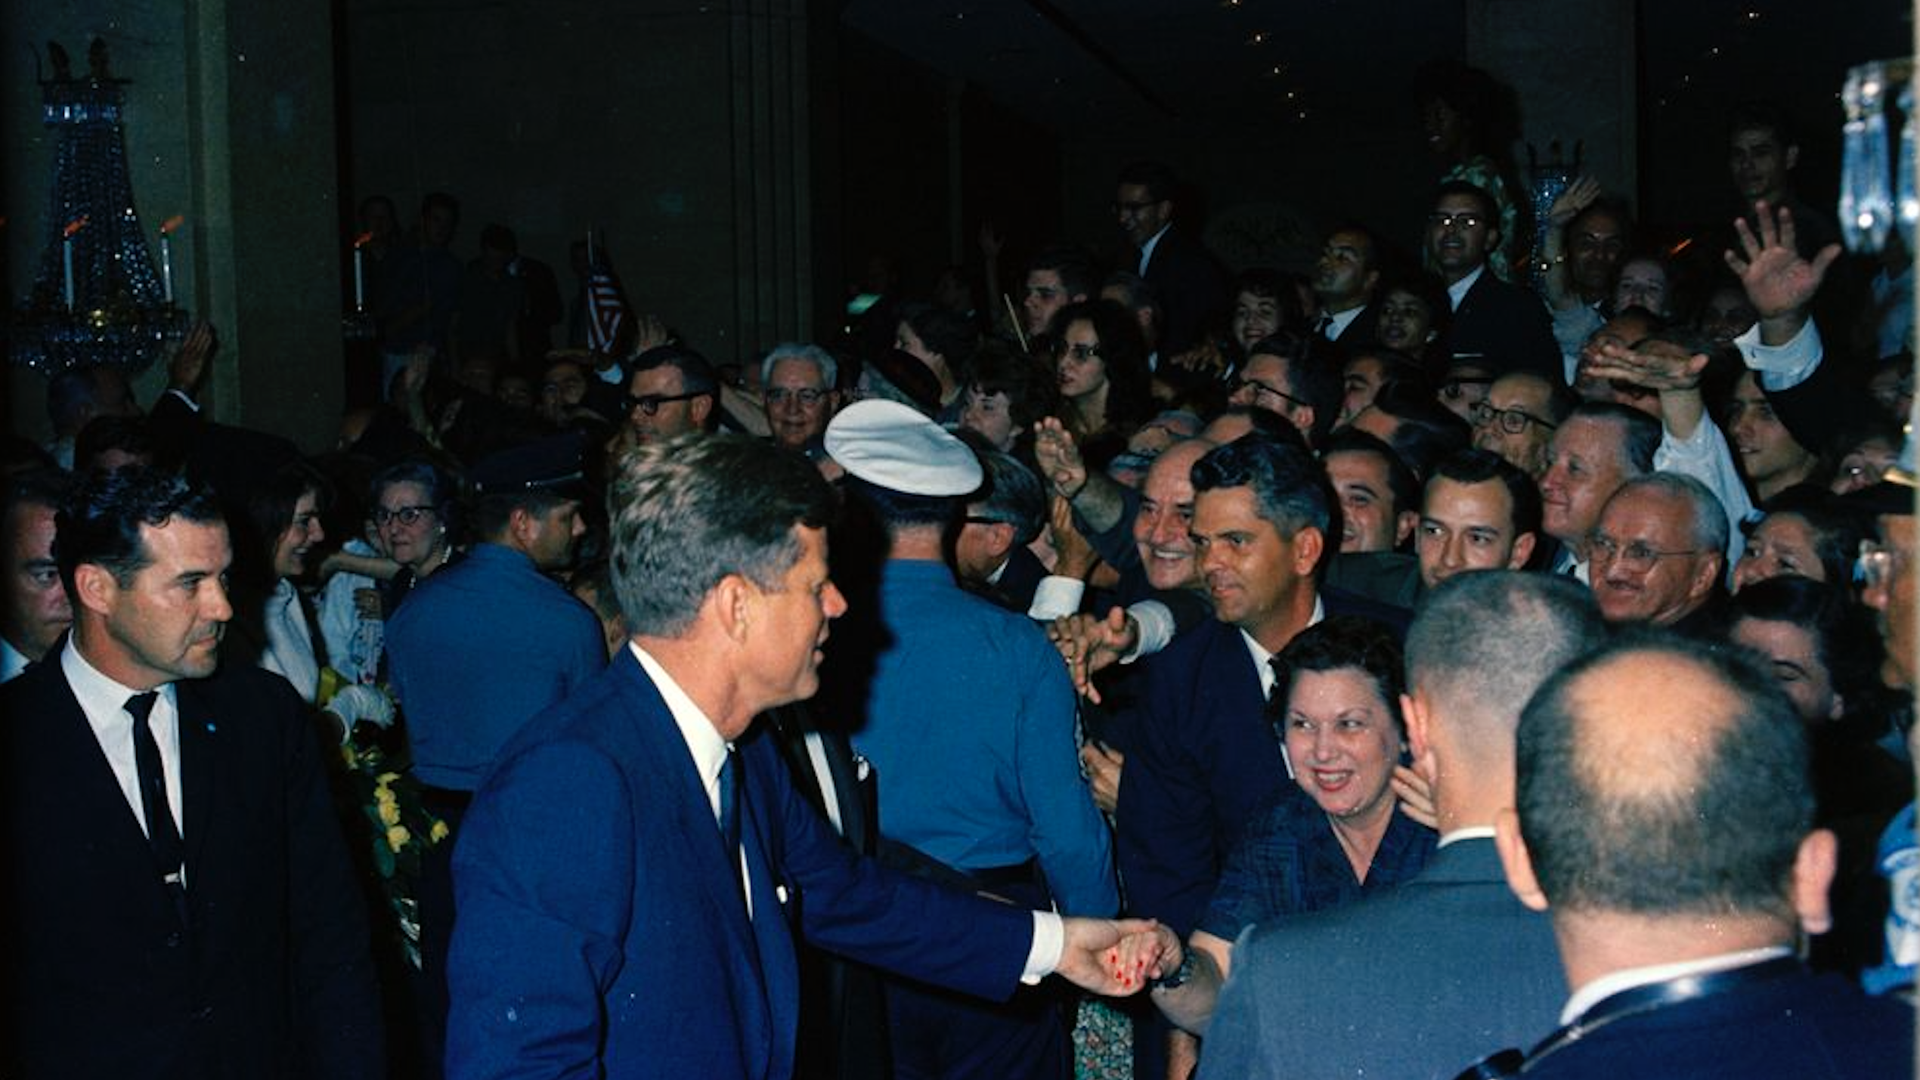 President John F. Kennedy and First Lady Jacqueline Kennedy (partially hidden at left) greet visitors upon their arrival at the Rice Hotel in Houston.